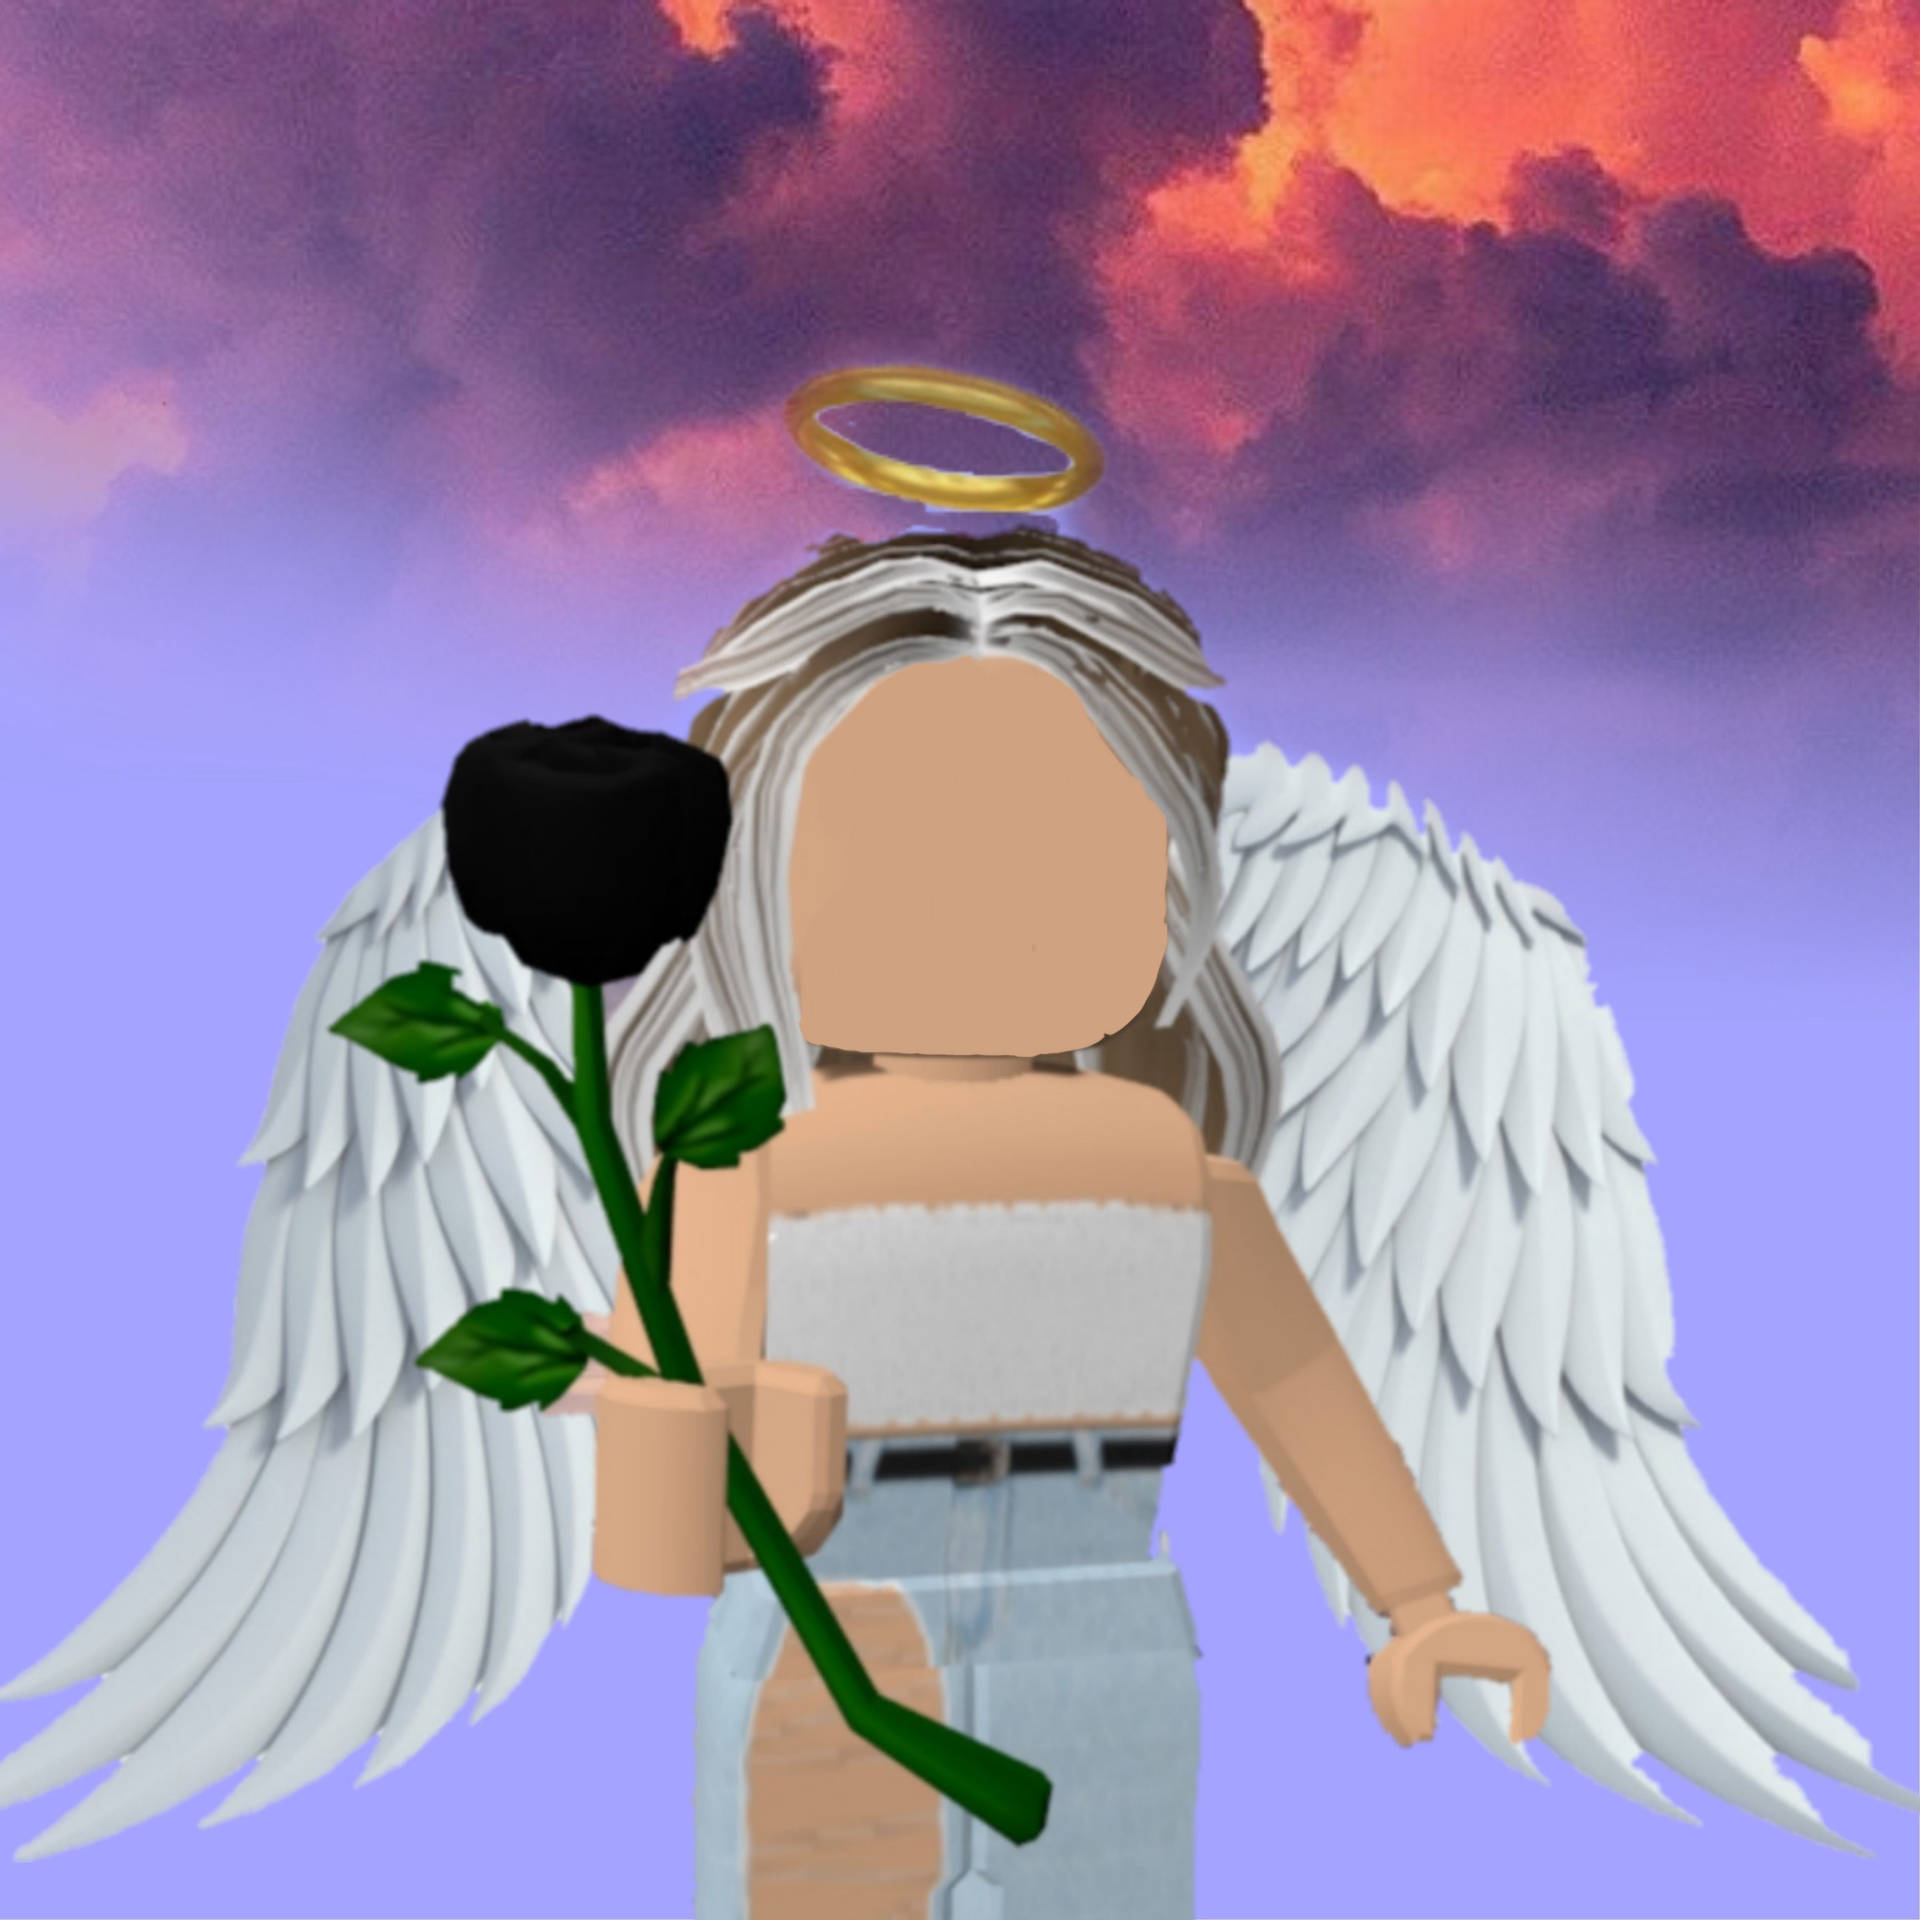 100+] Aesthetic Roblox Wallpapers